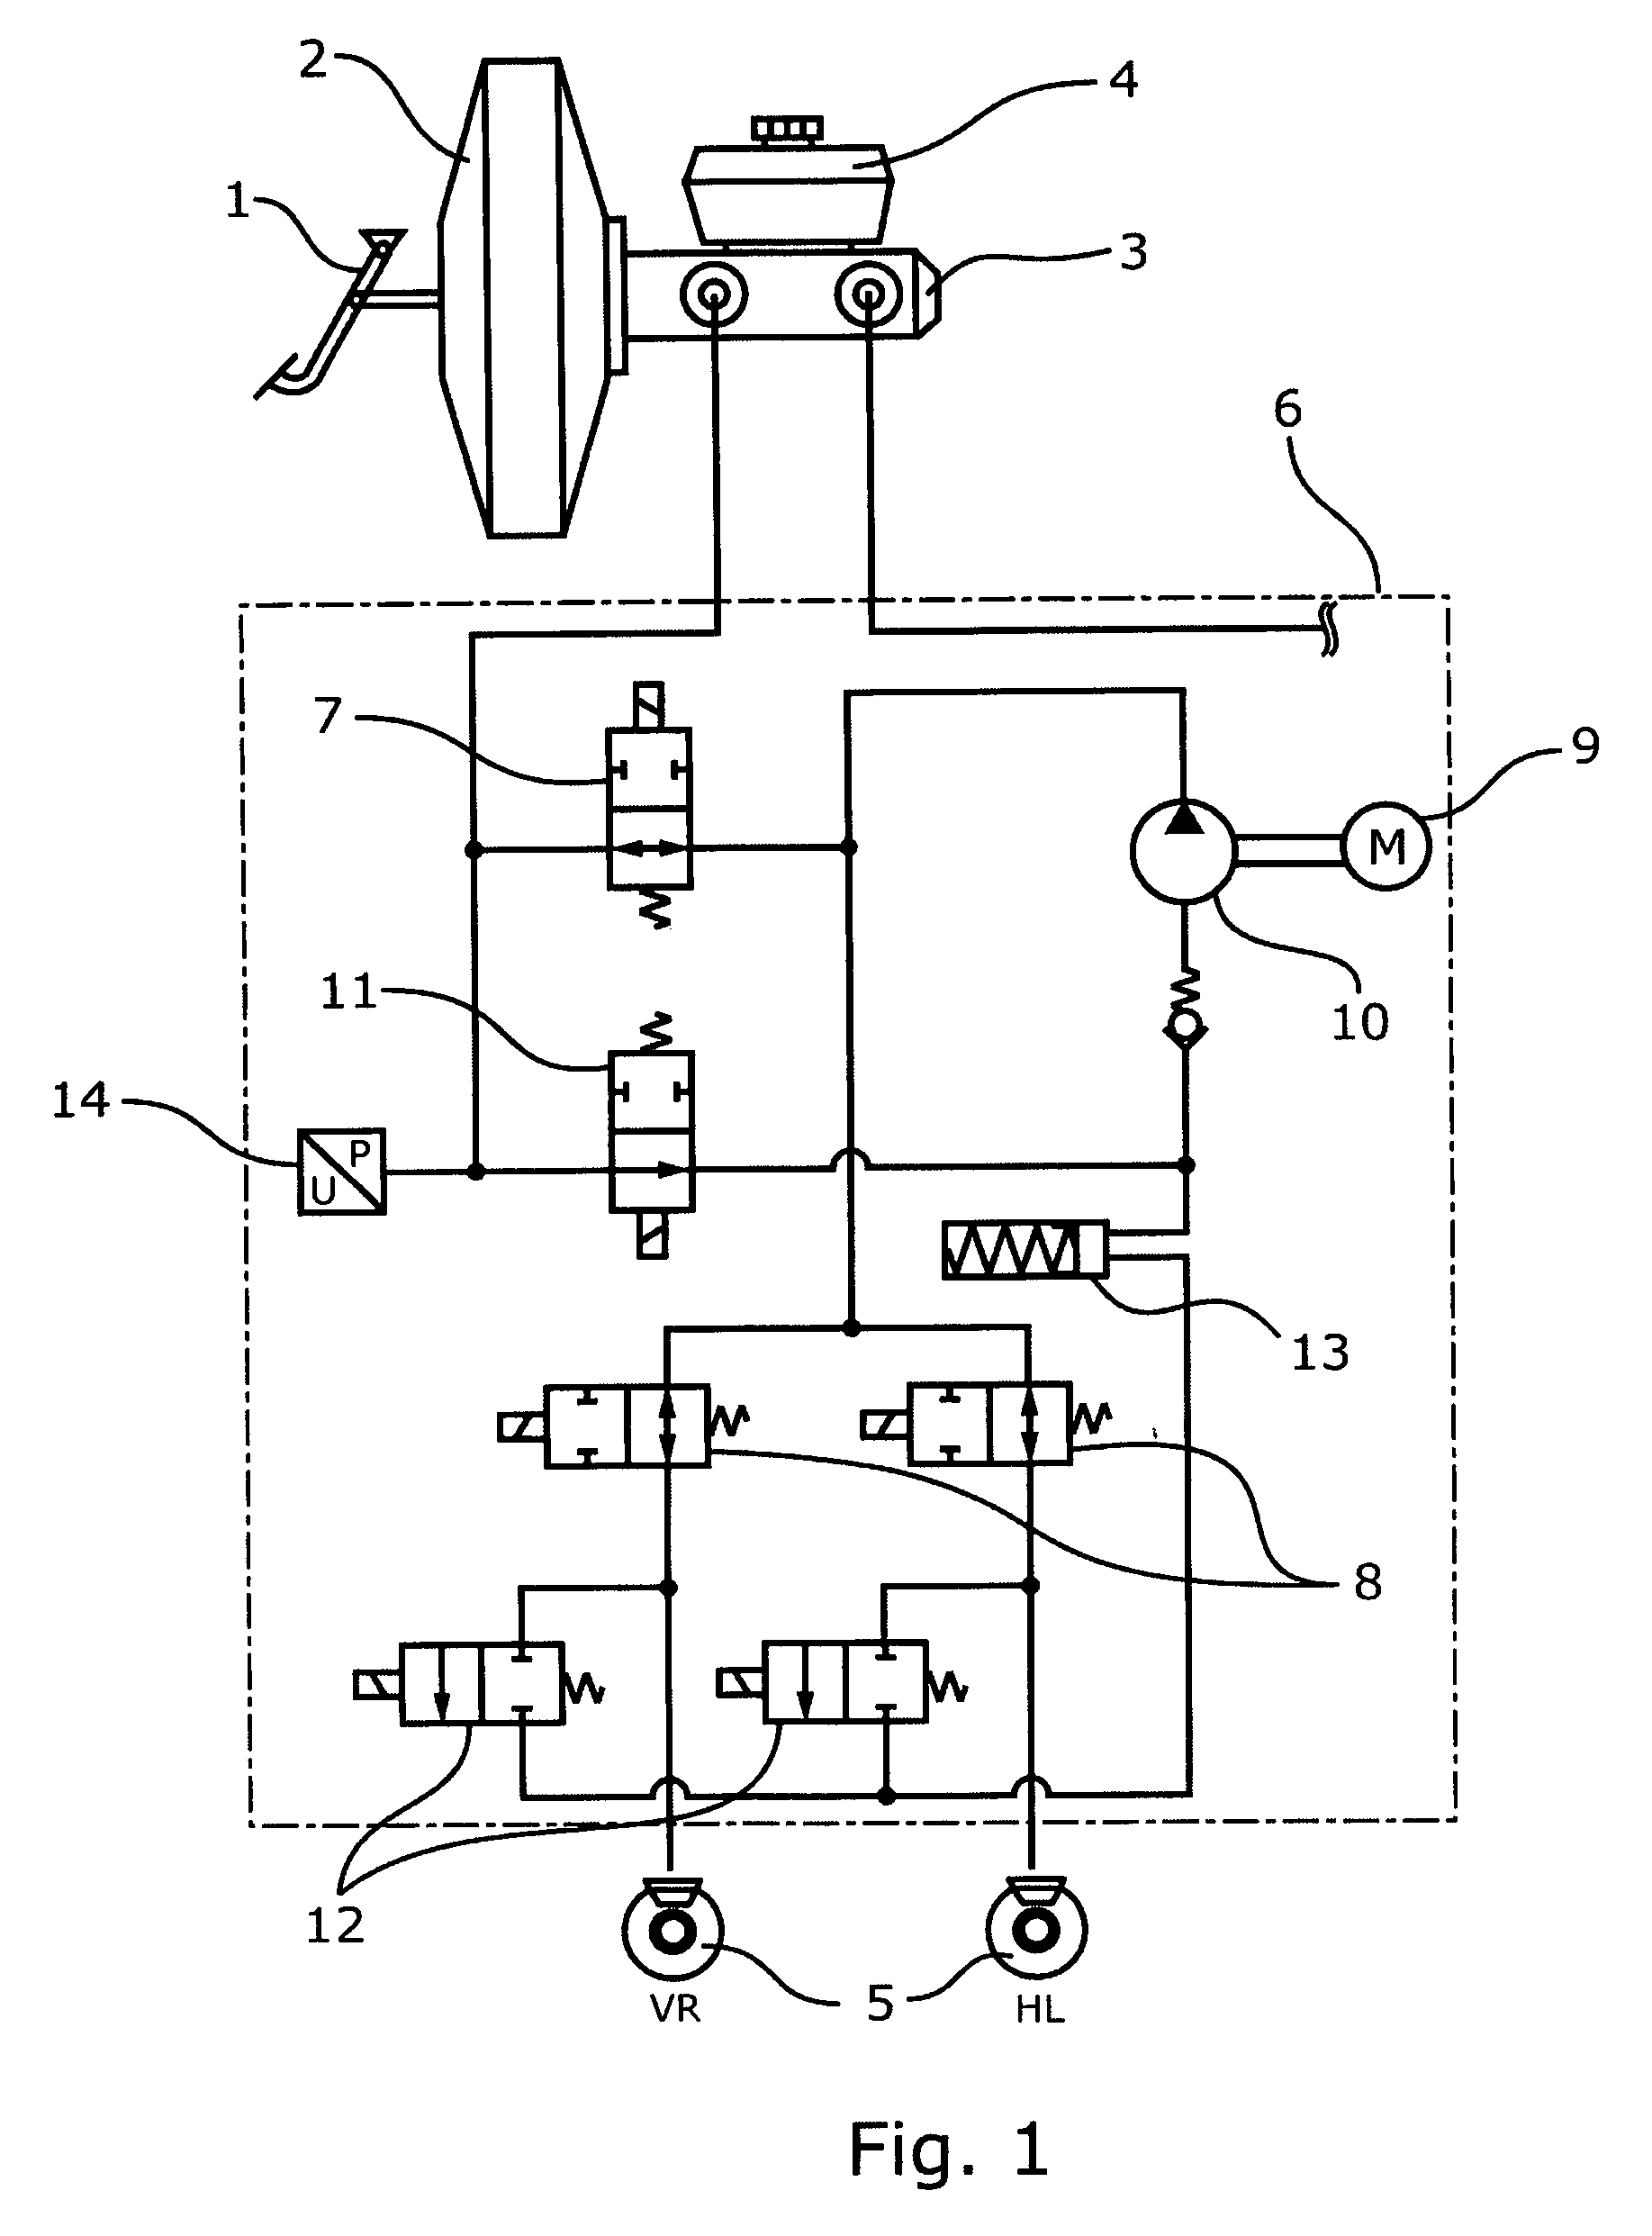 Method for supporting a brake system in case of reduced effectiveness of the vehicle brake system